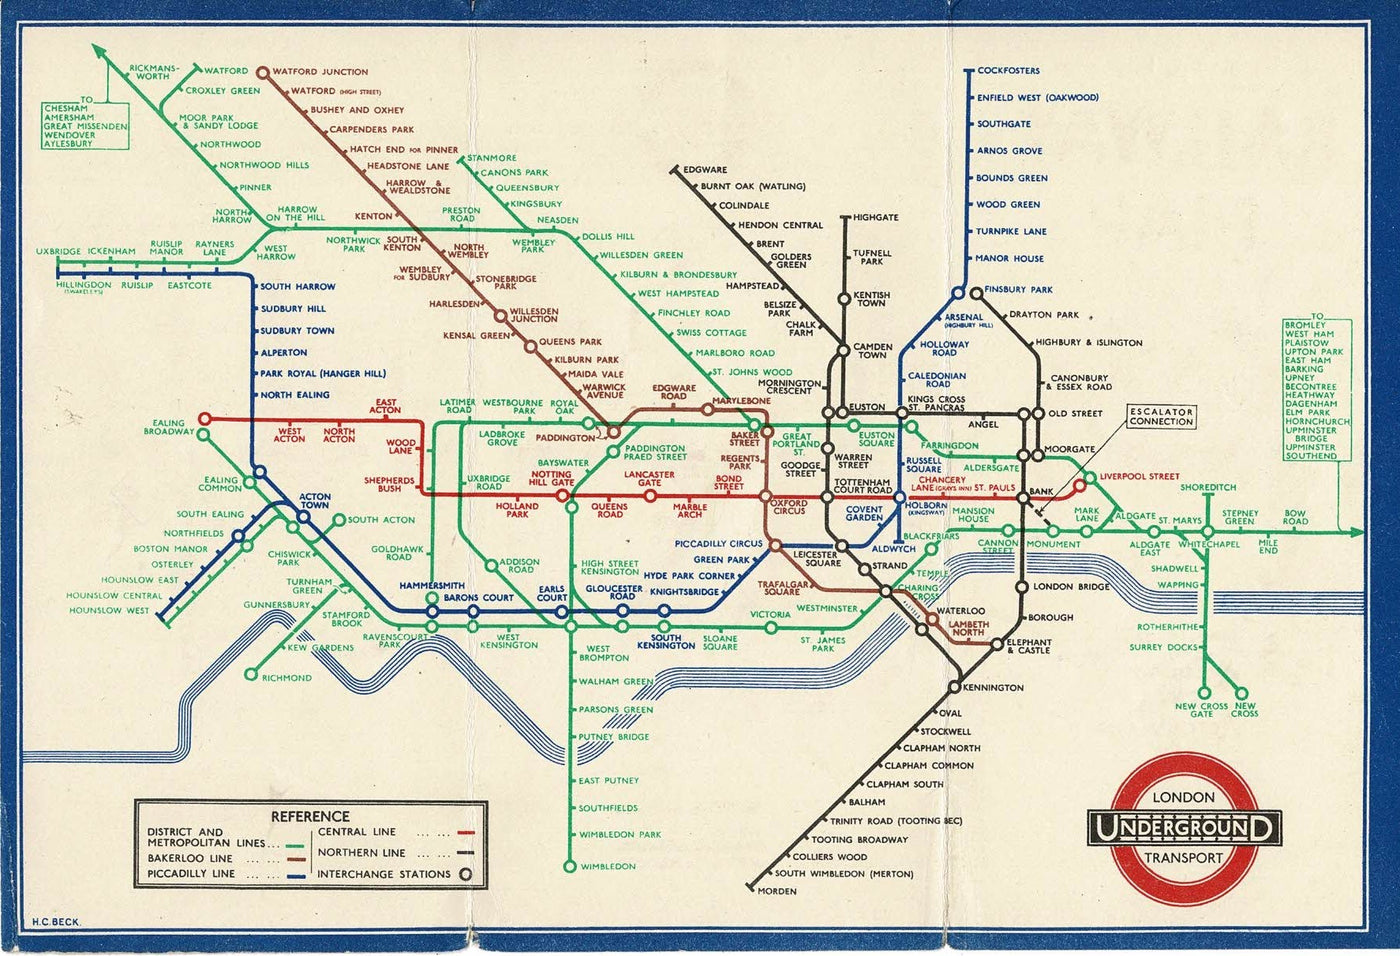 London Underground vintage map by Harry Beck 1938